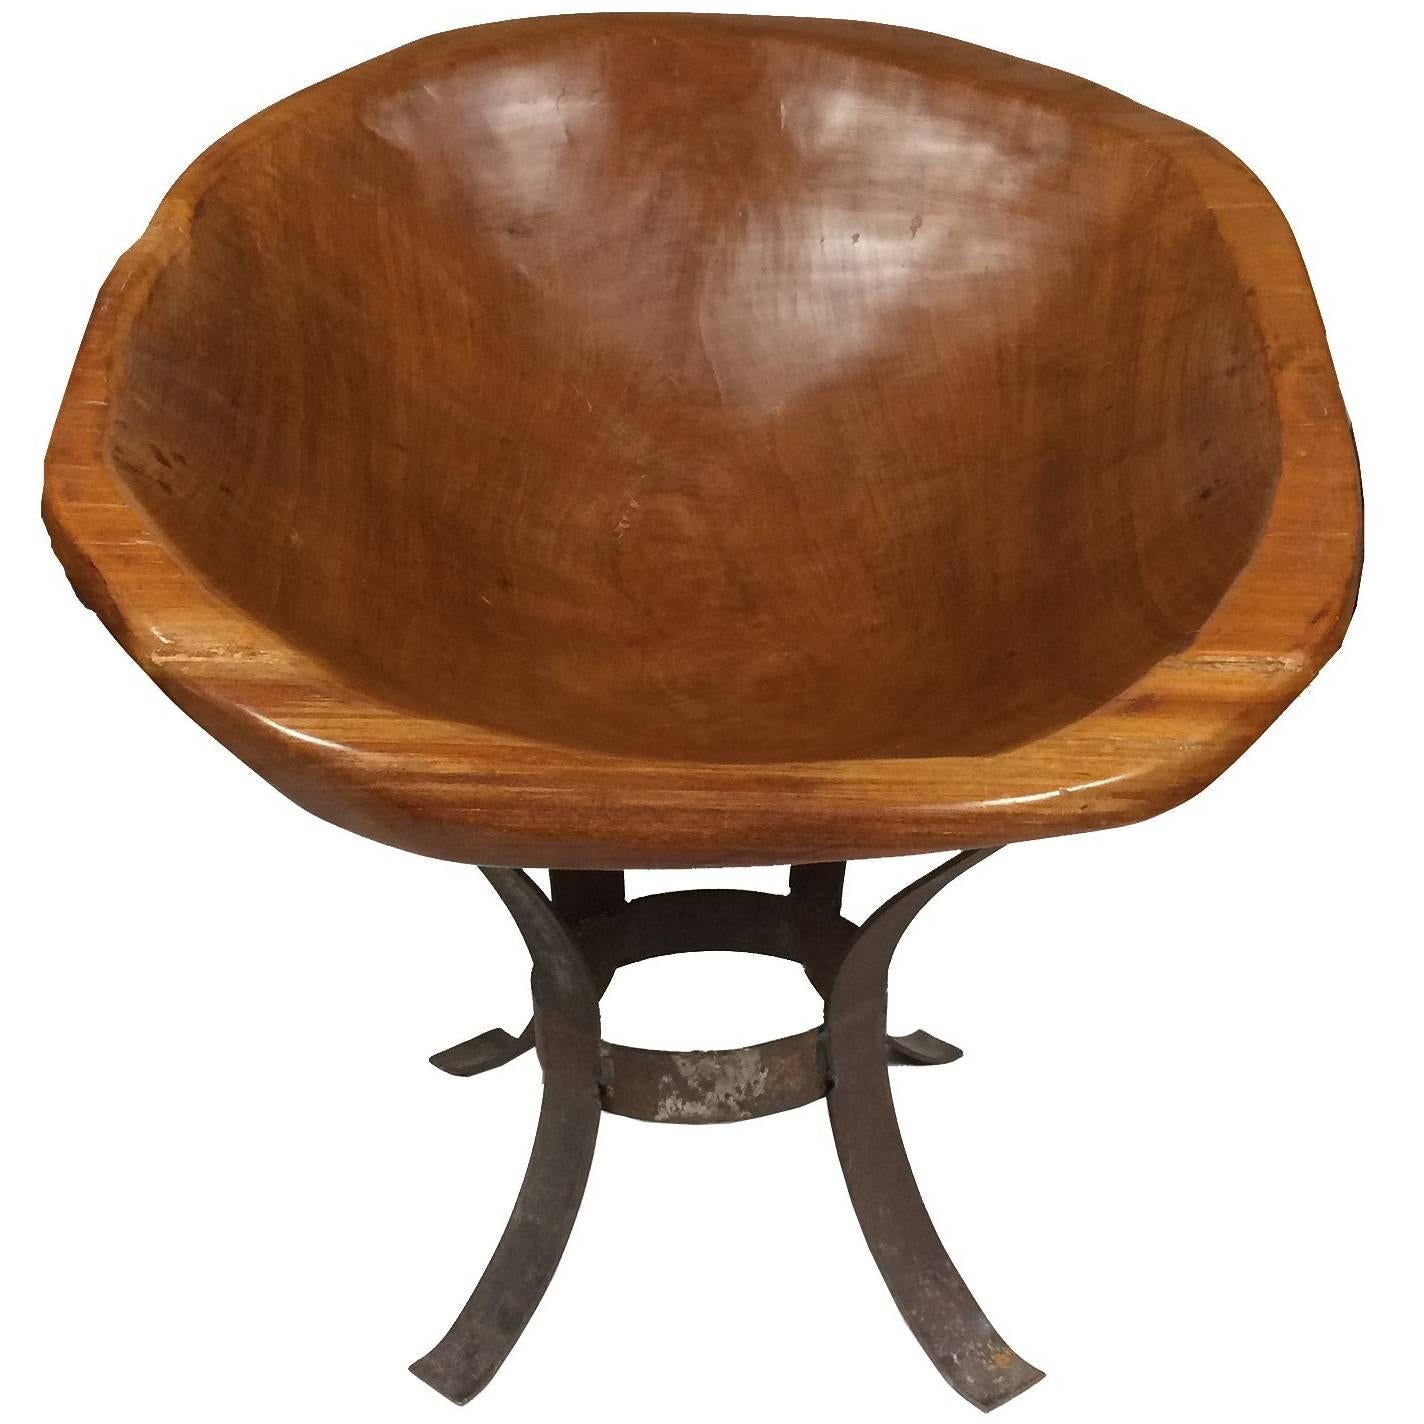 Funky Mid-Century Modern Carved Wood Barrel Chair